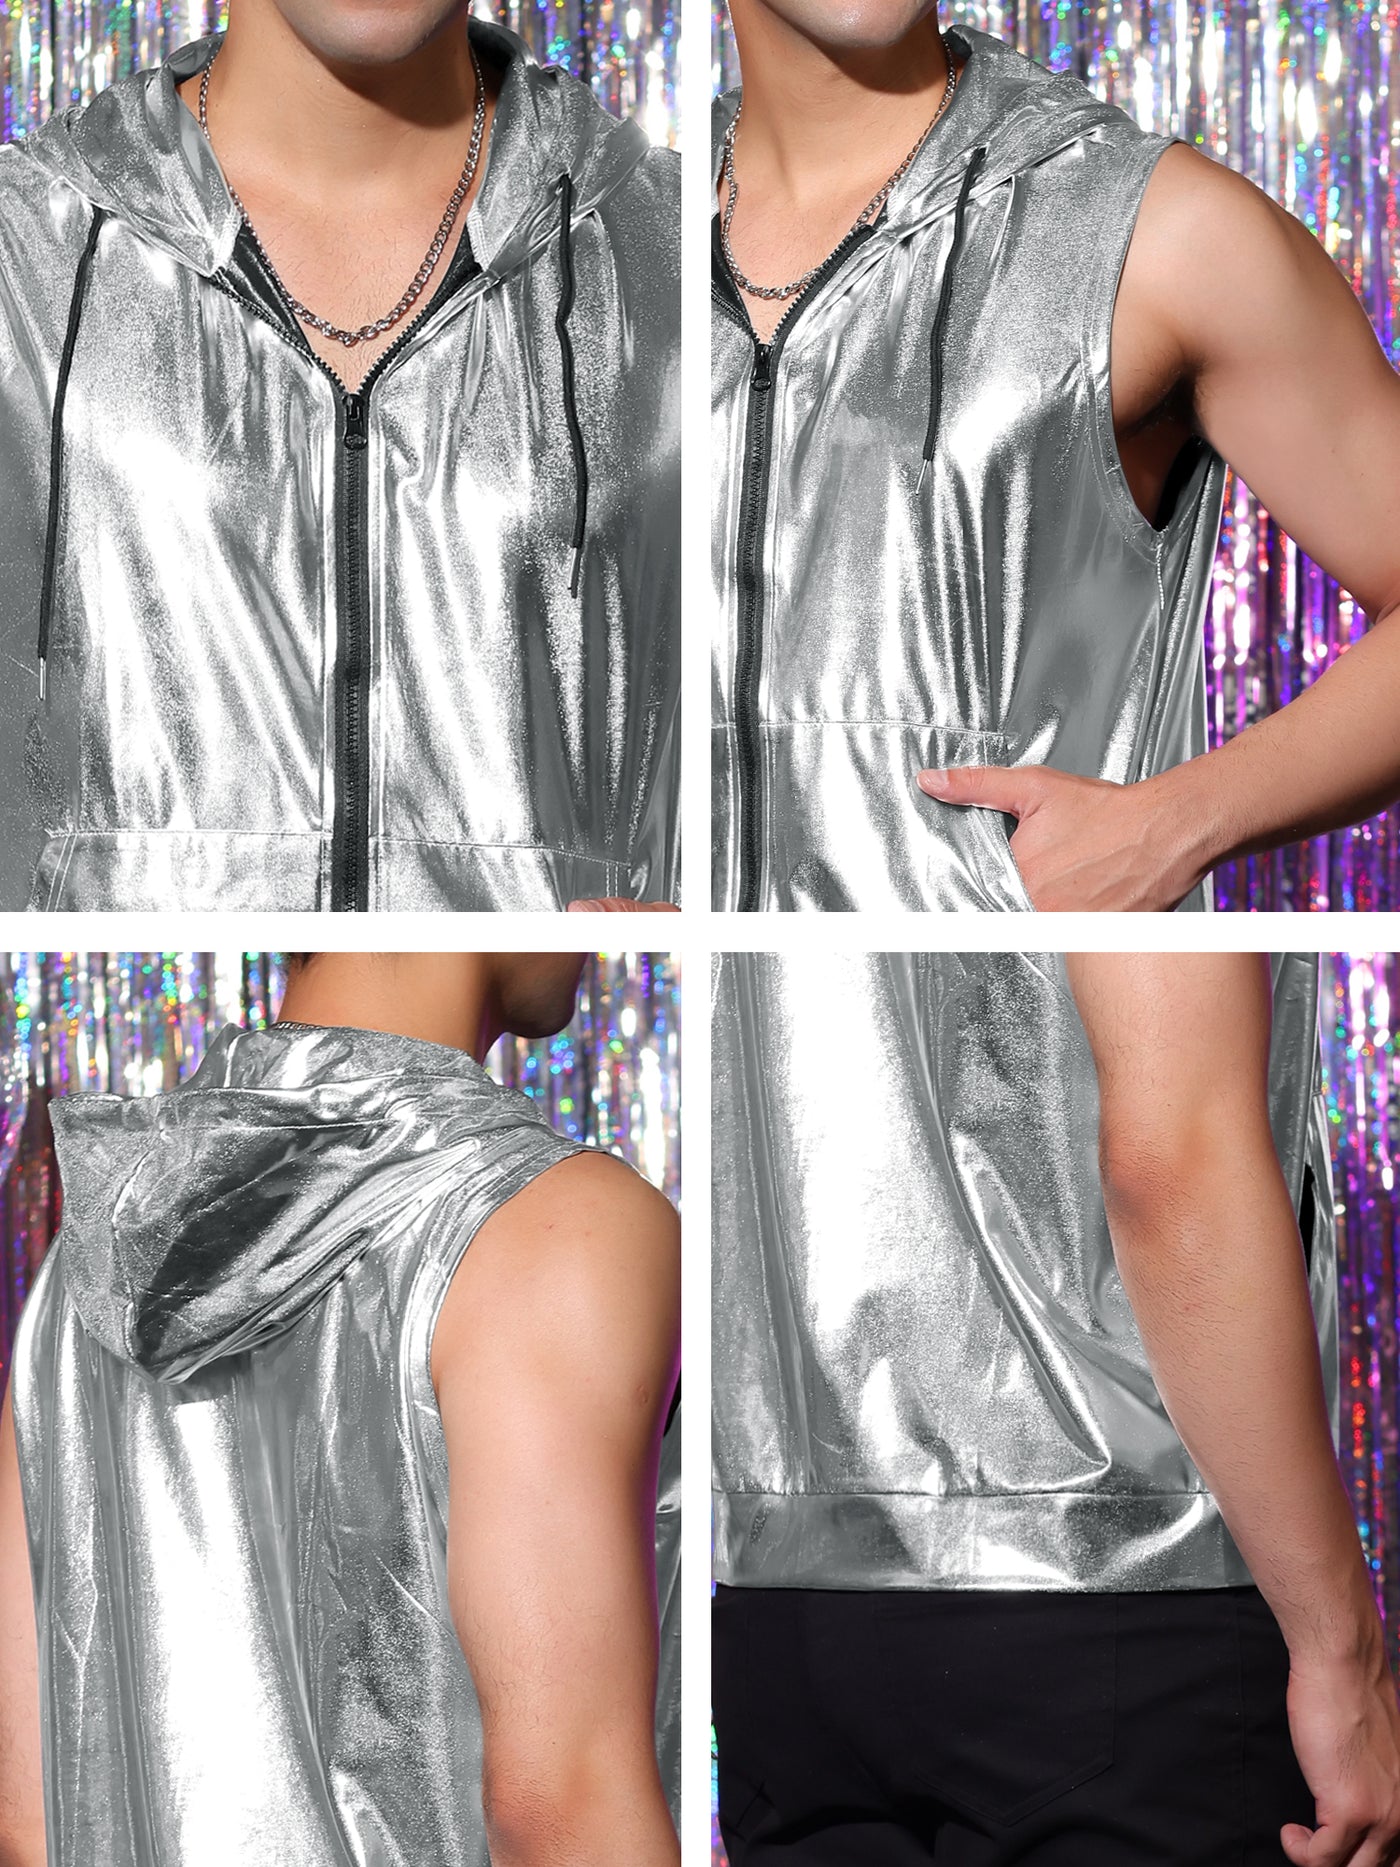 Bublédon Men's Metallic Hooded Vest Zip Up Party Shiny Sleeveless Hoodie with Pocket